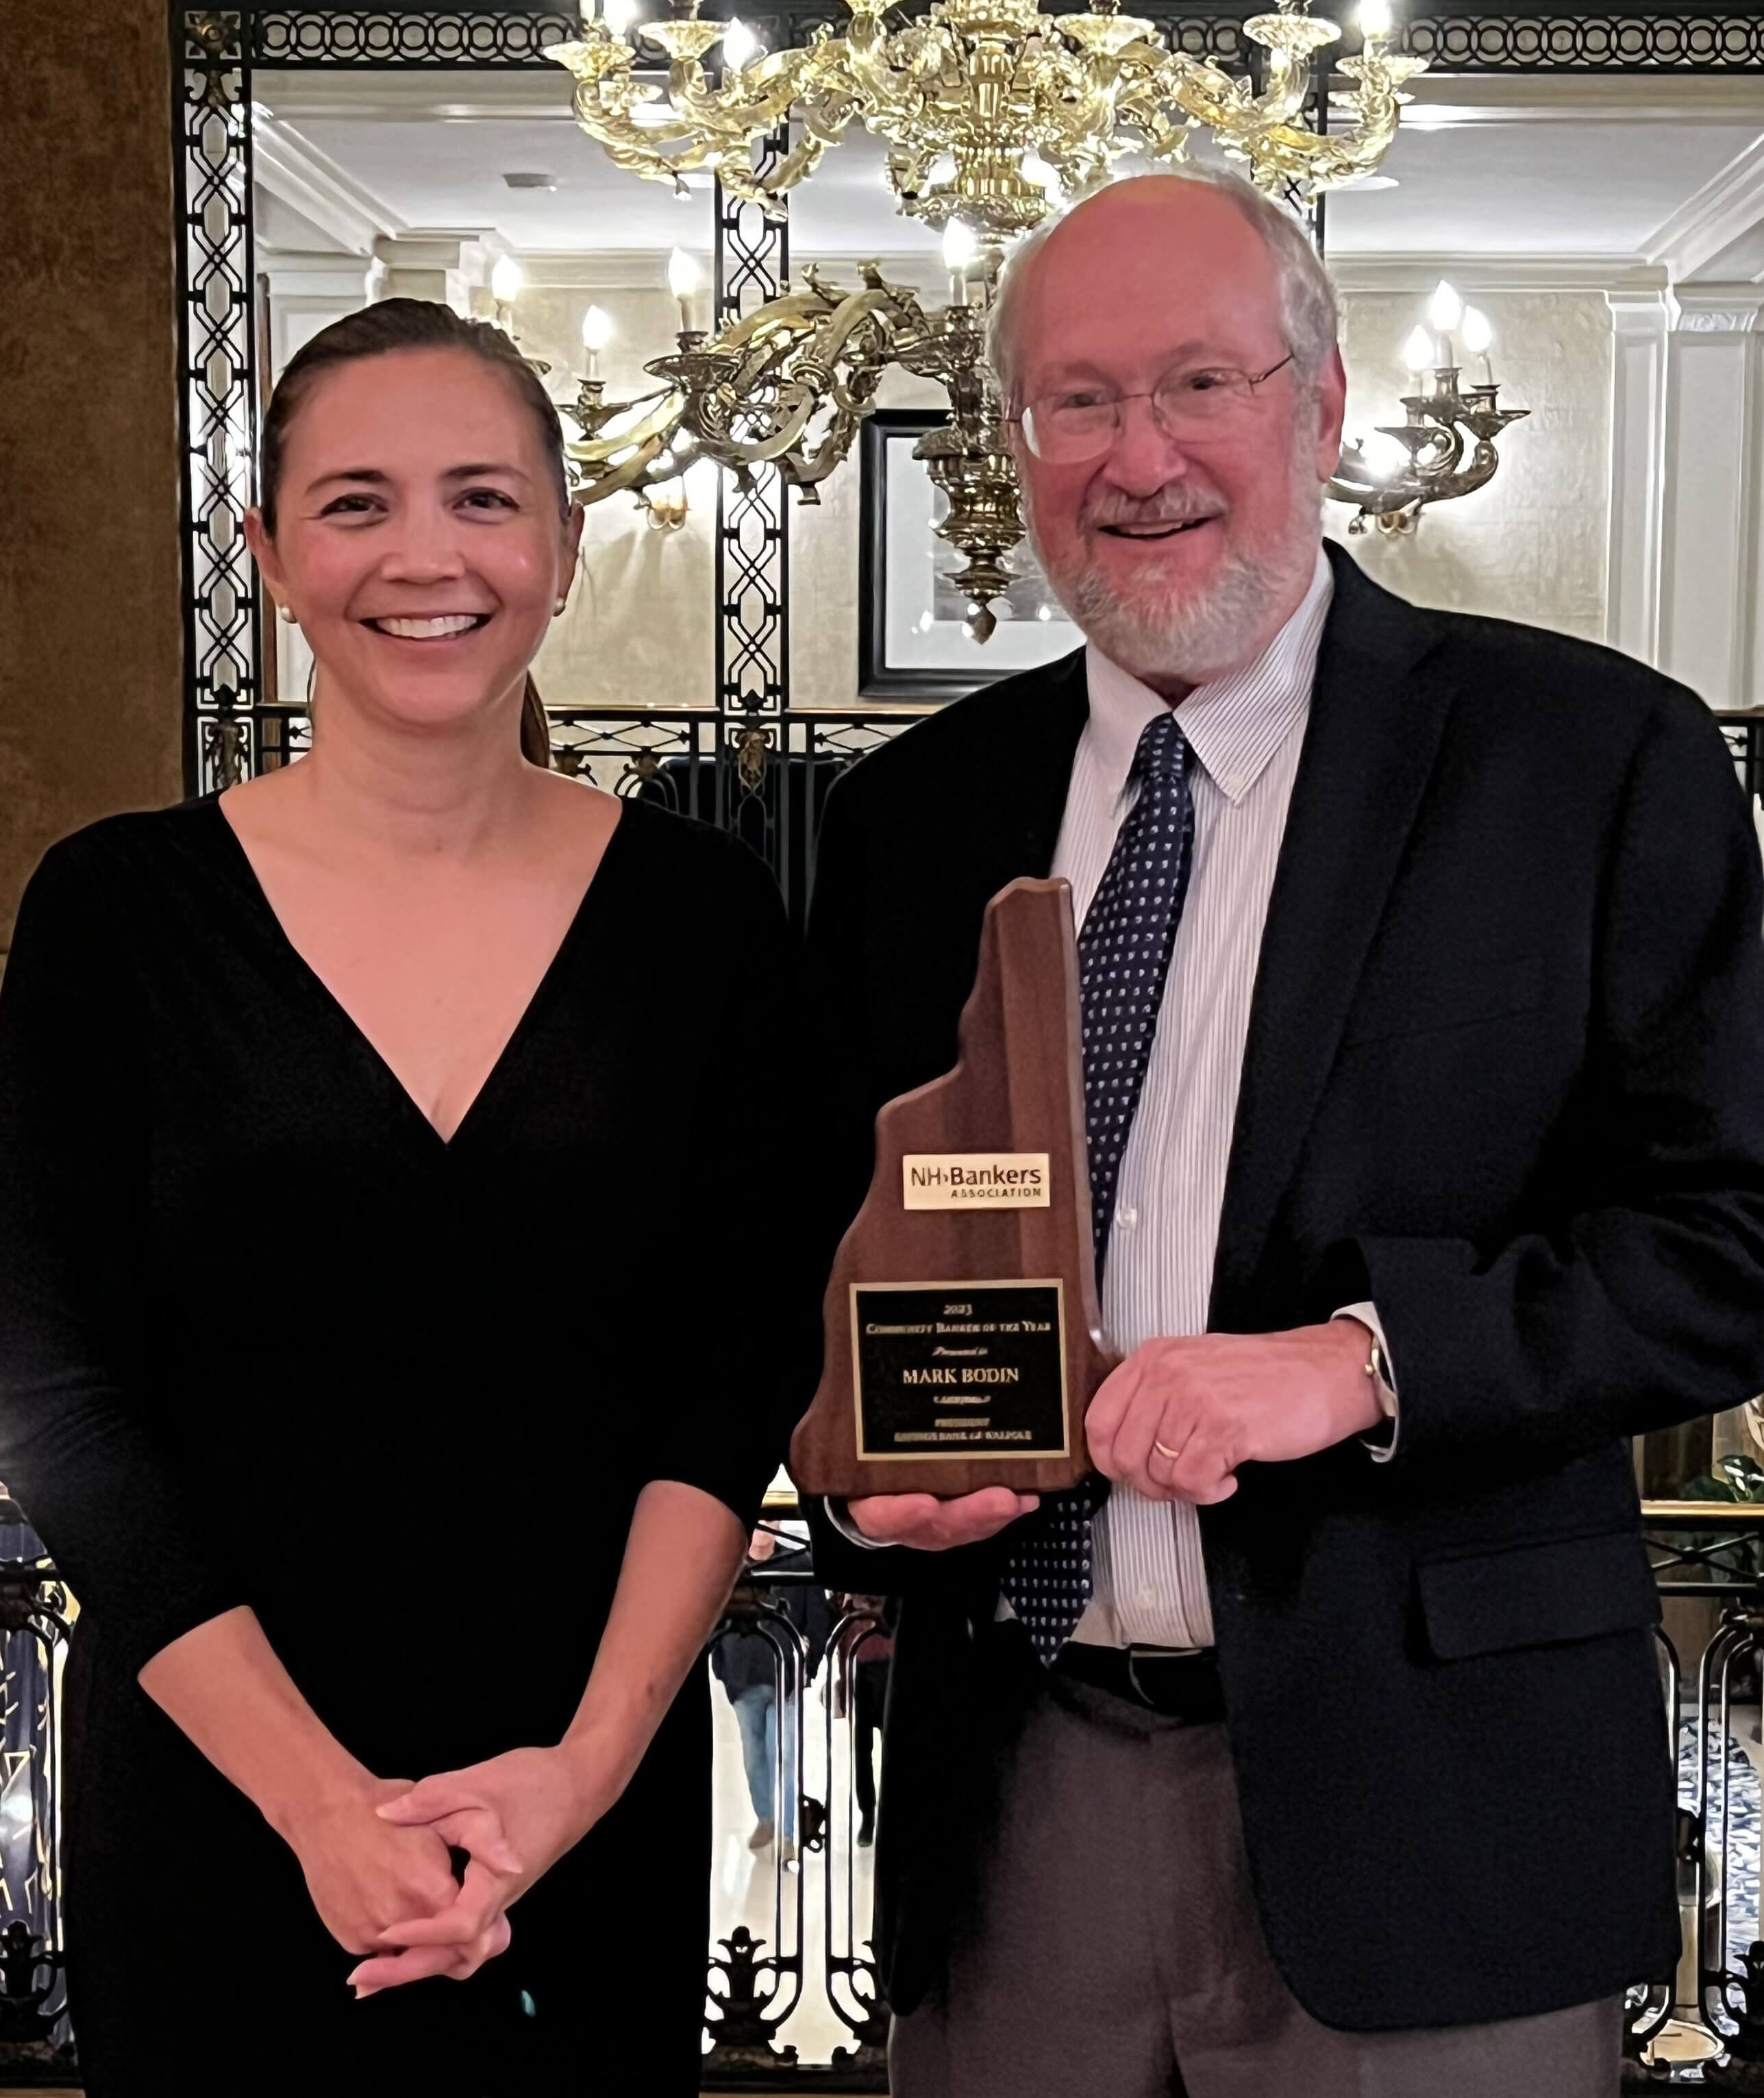 Kristy Merrill, President of New Hampshire Bankers Association with Community Banker of the Year Recipient, Mark Bodin, President of Savings Bank of Walpole.